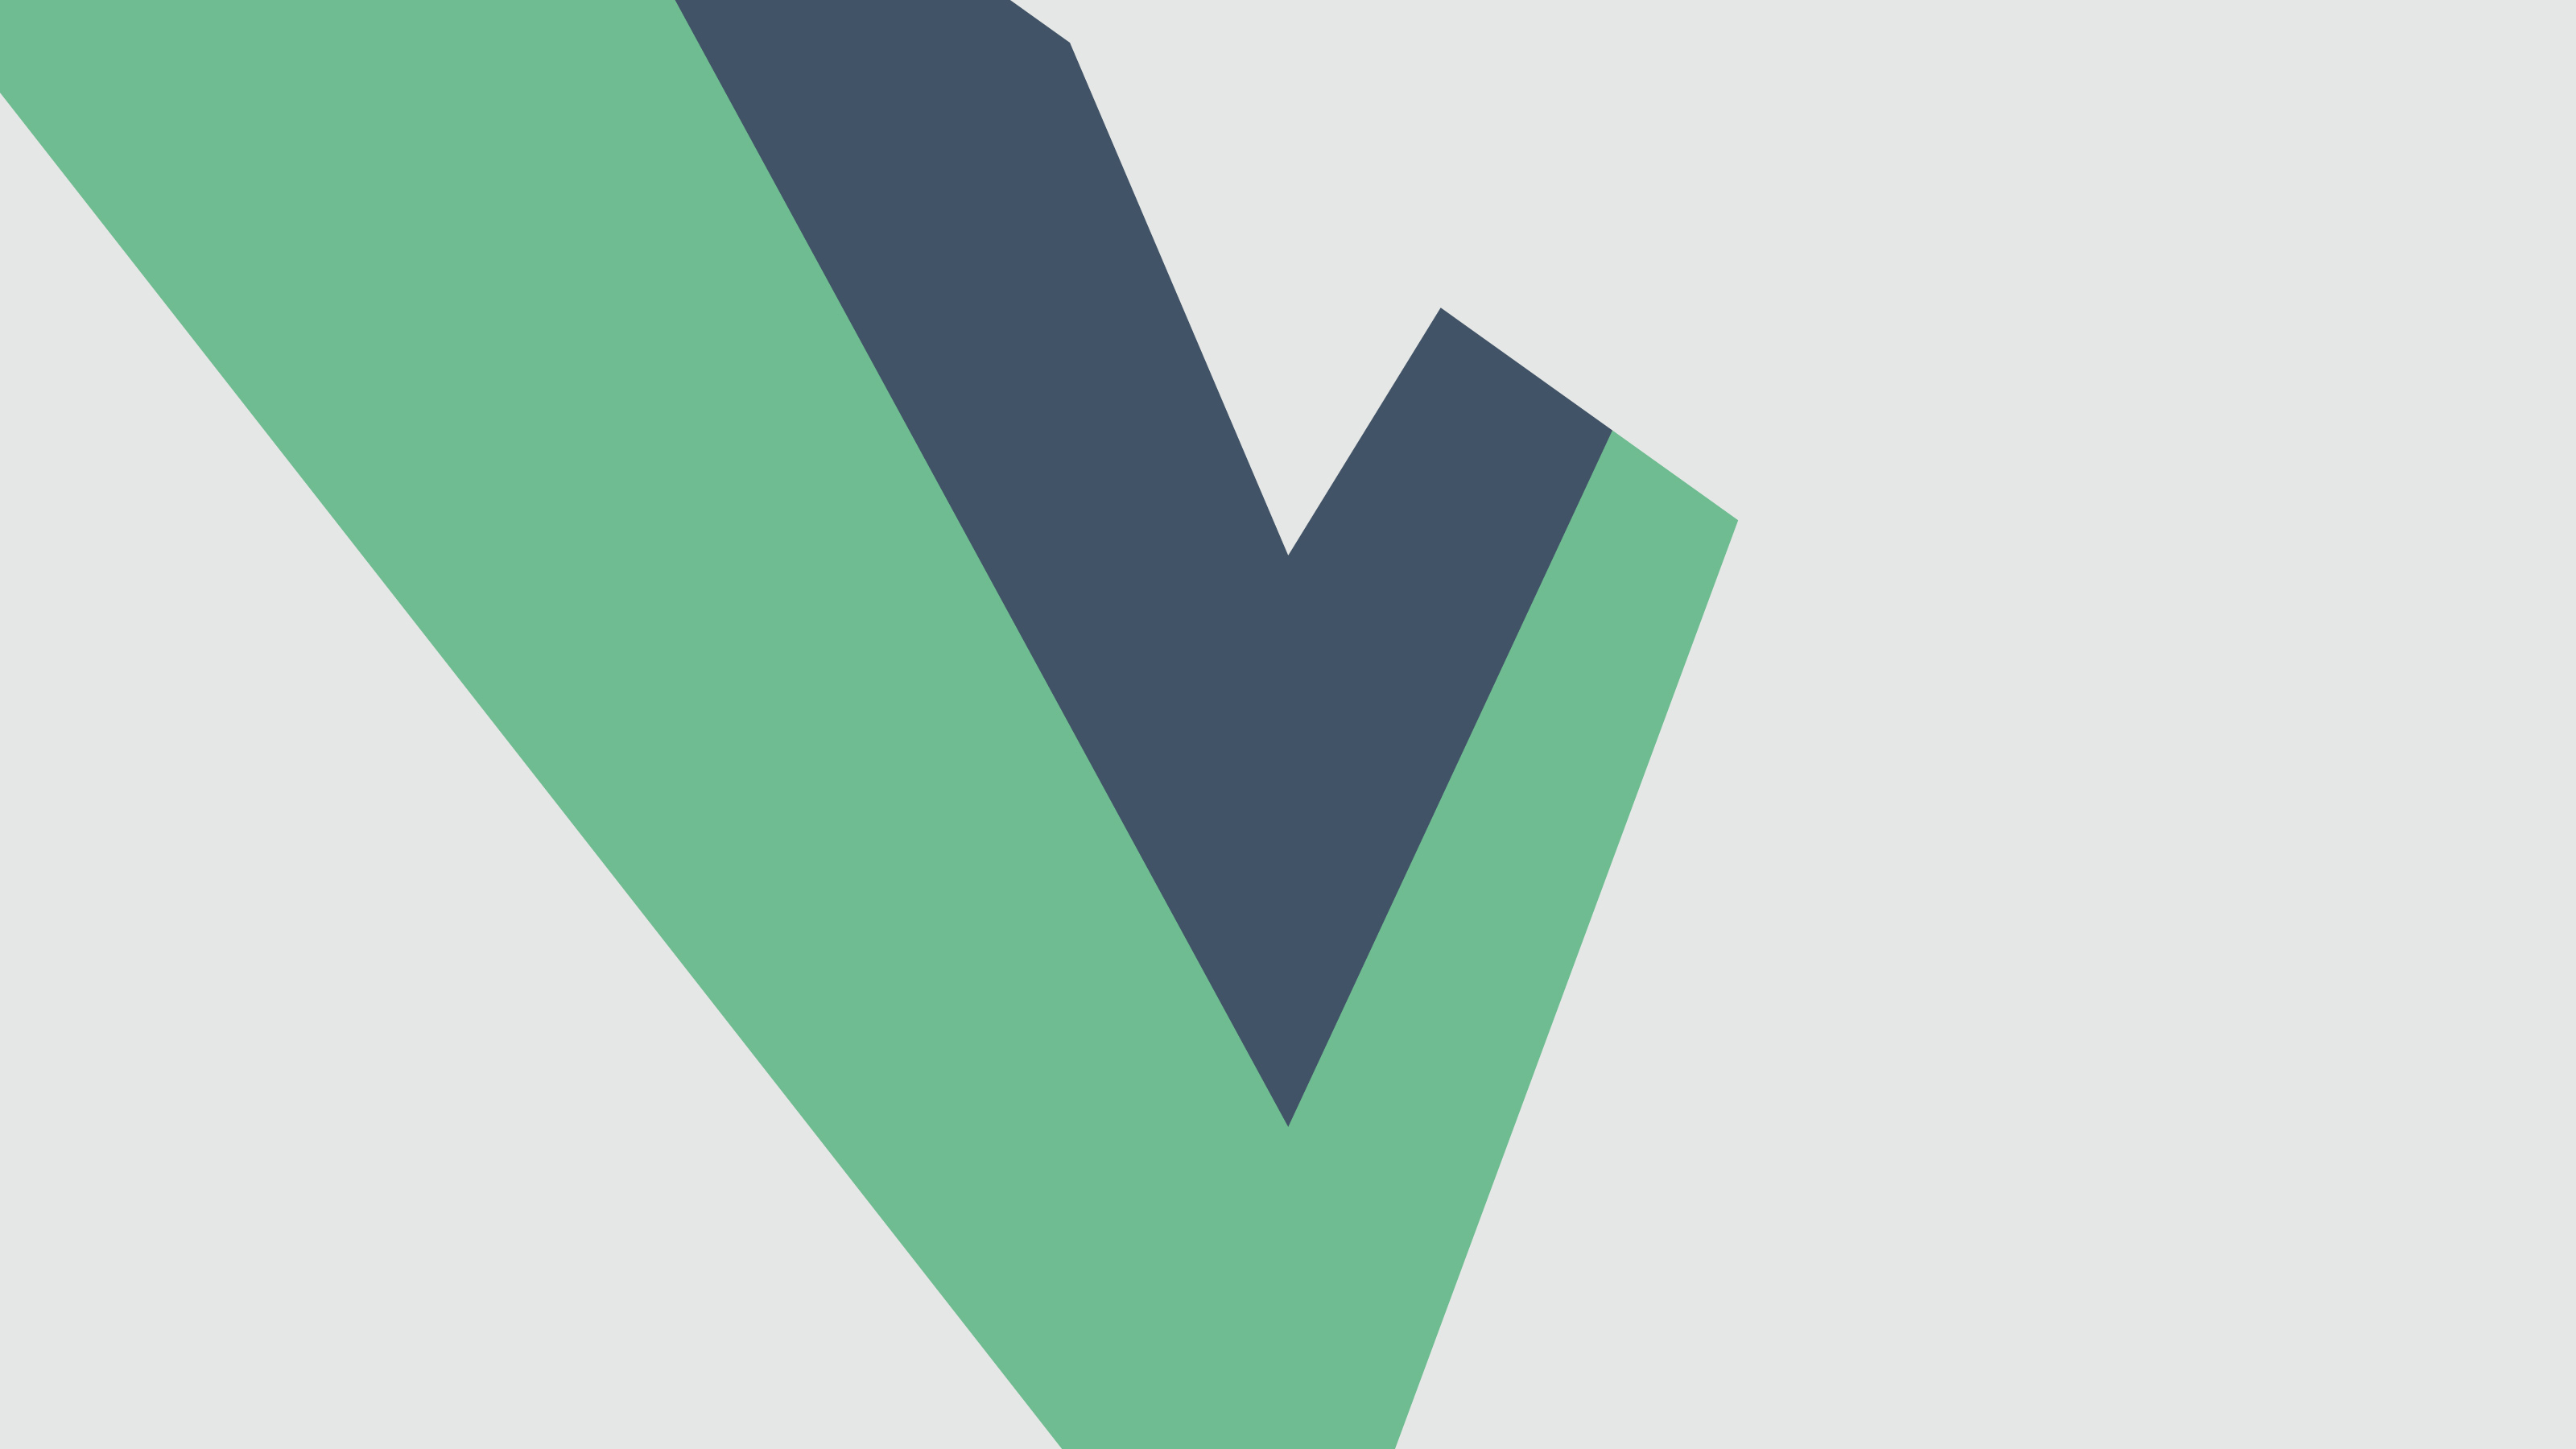 Vue.js Meetup #3: On Vuetify and Higher-Order Components